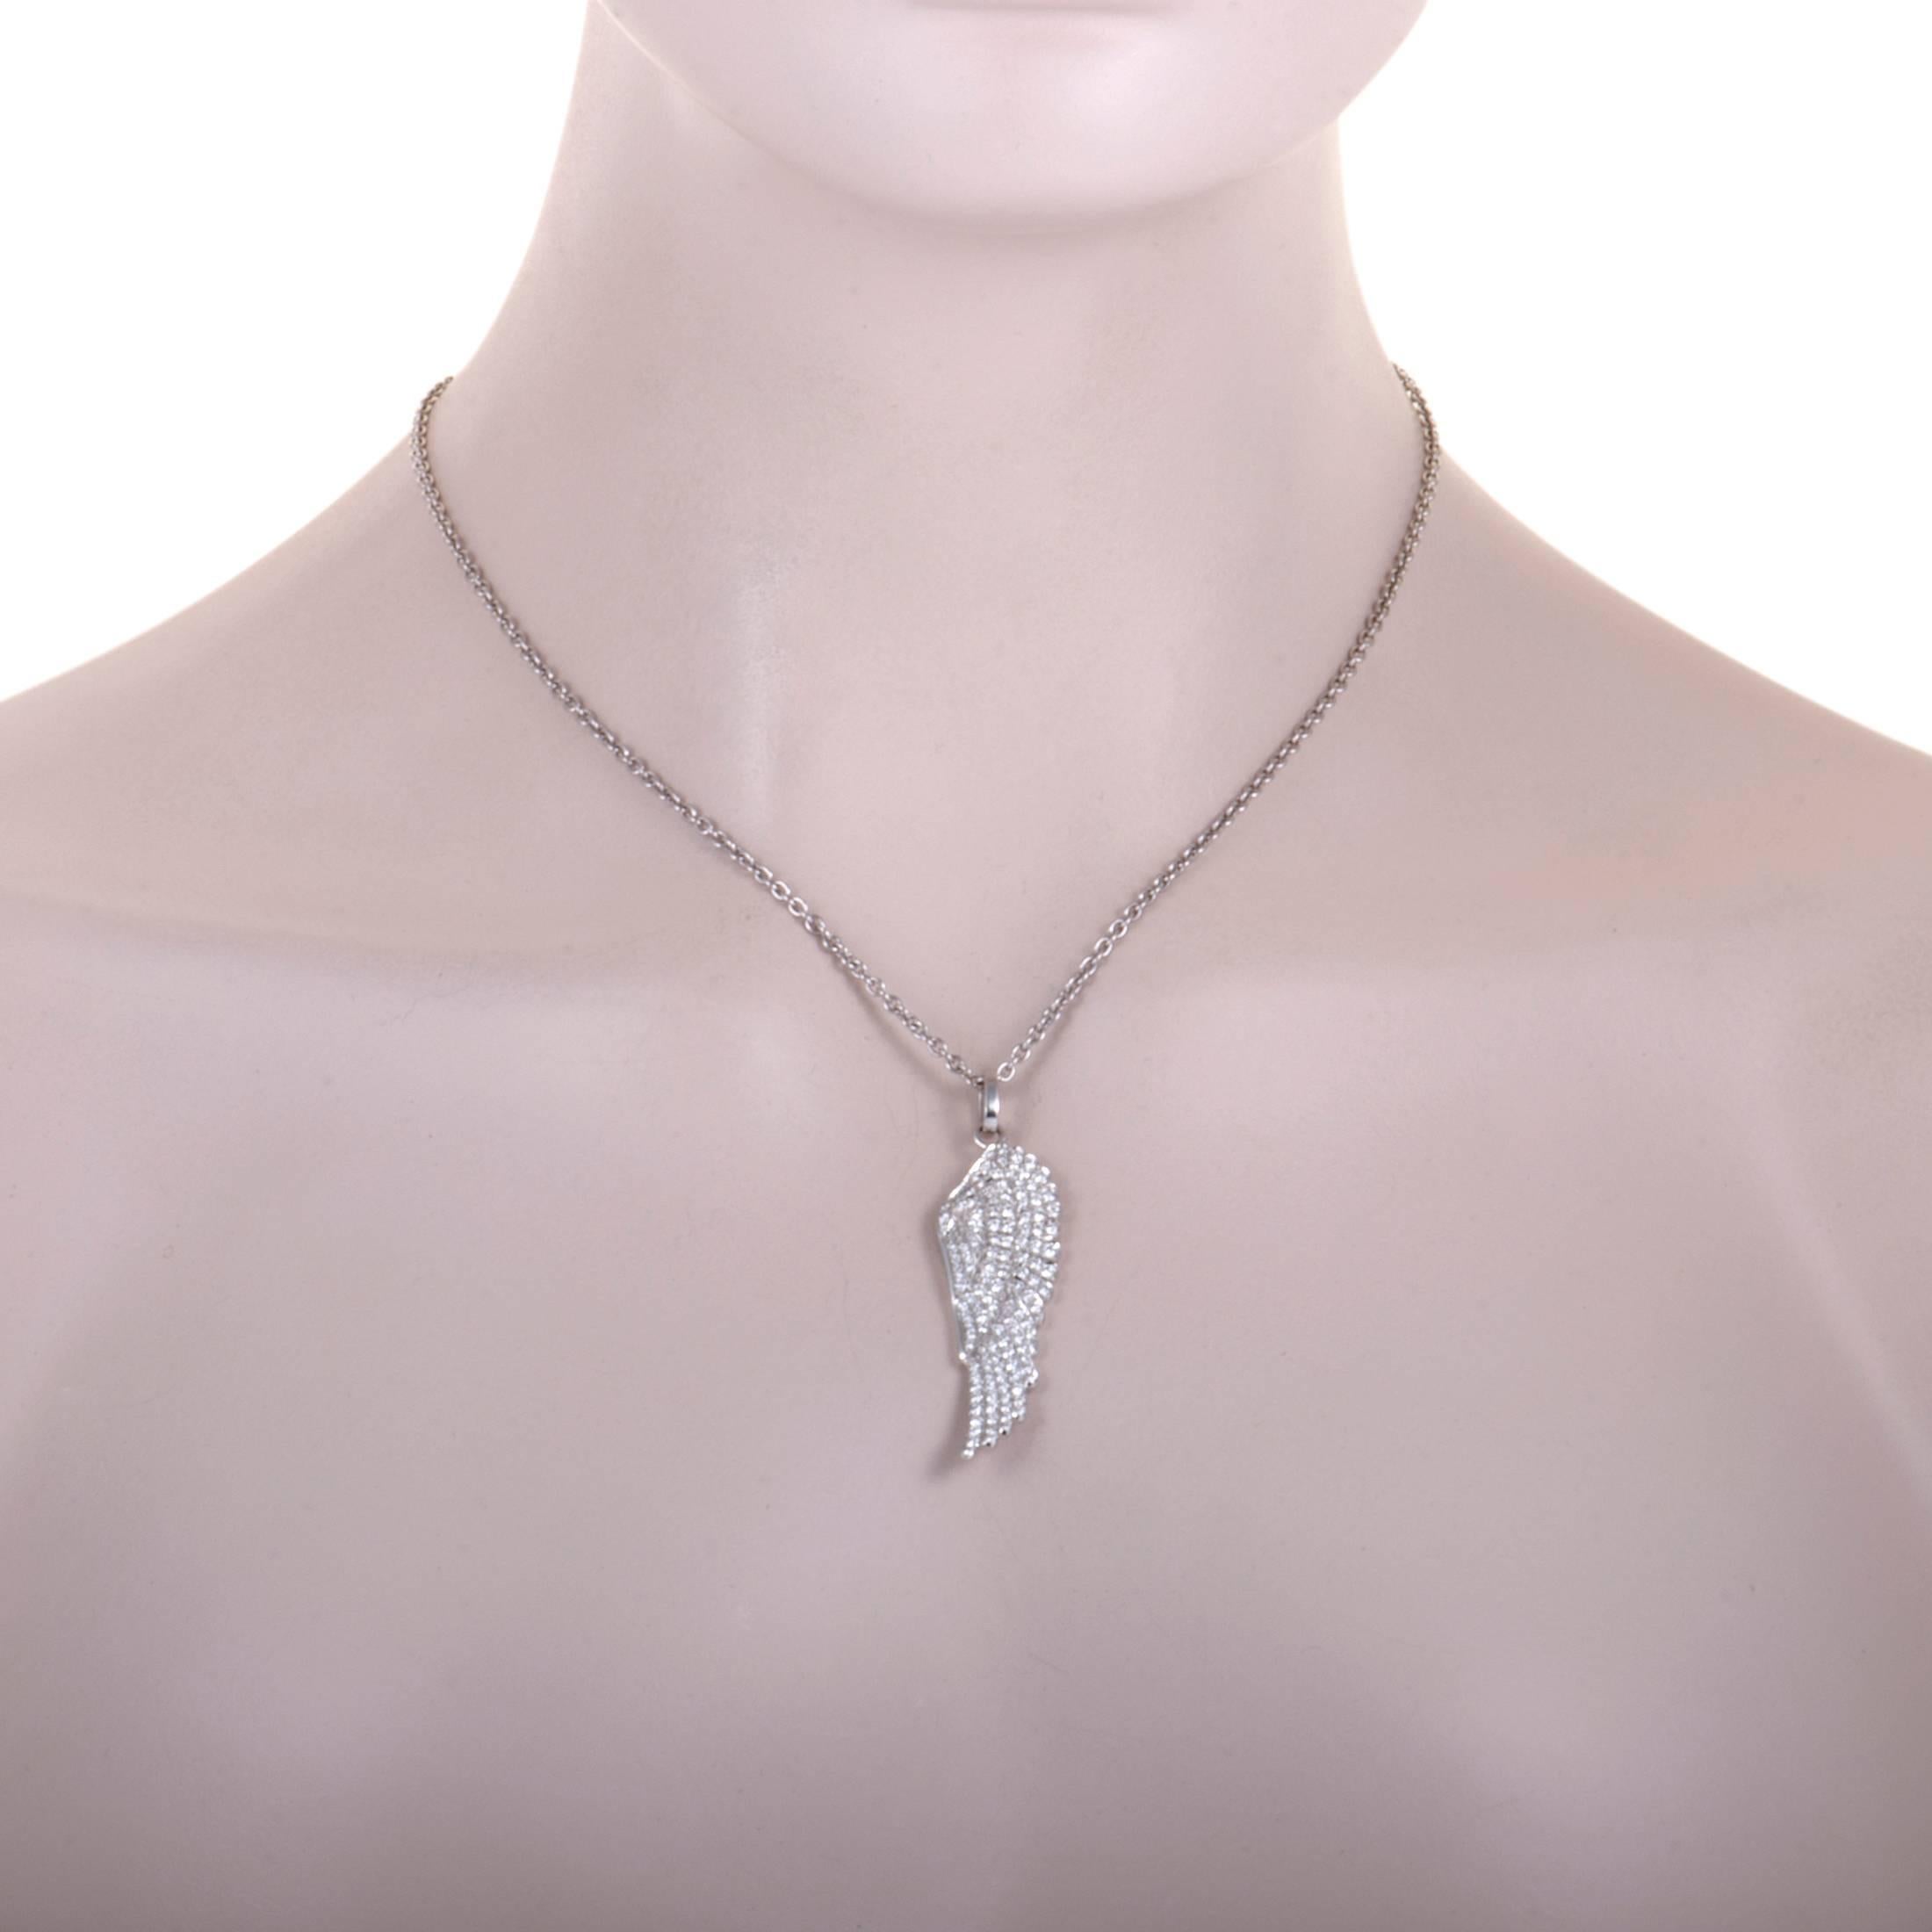 Perfectly appropriate for the appealing motif of a wonderful wing, the astonishing setting of lustrous diamonds totaling 1.70 carats produces eye-catching allure and everlasting brilliance in this mesmerizing 18K white gold necklace from